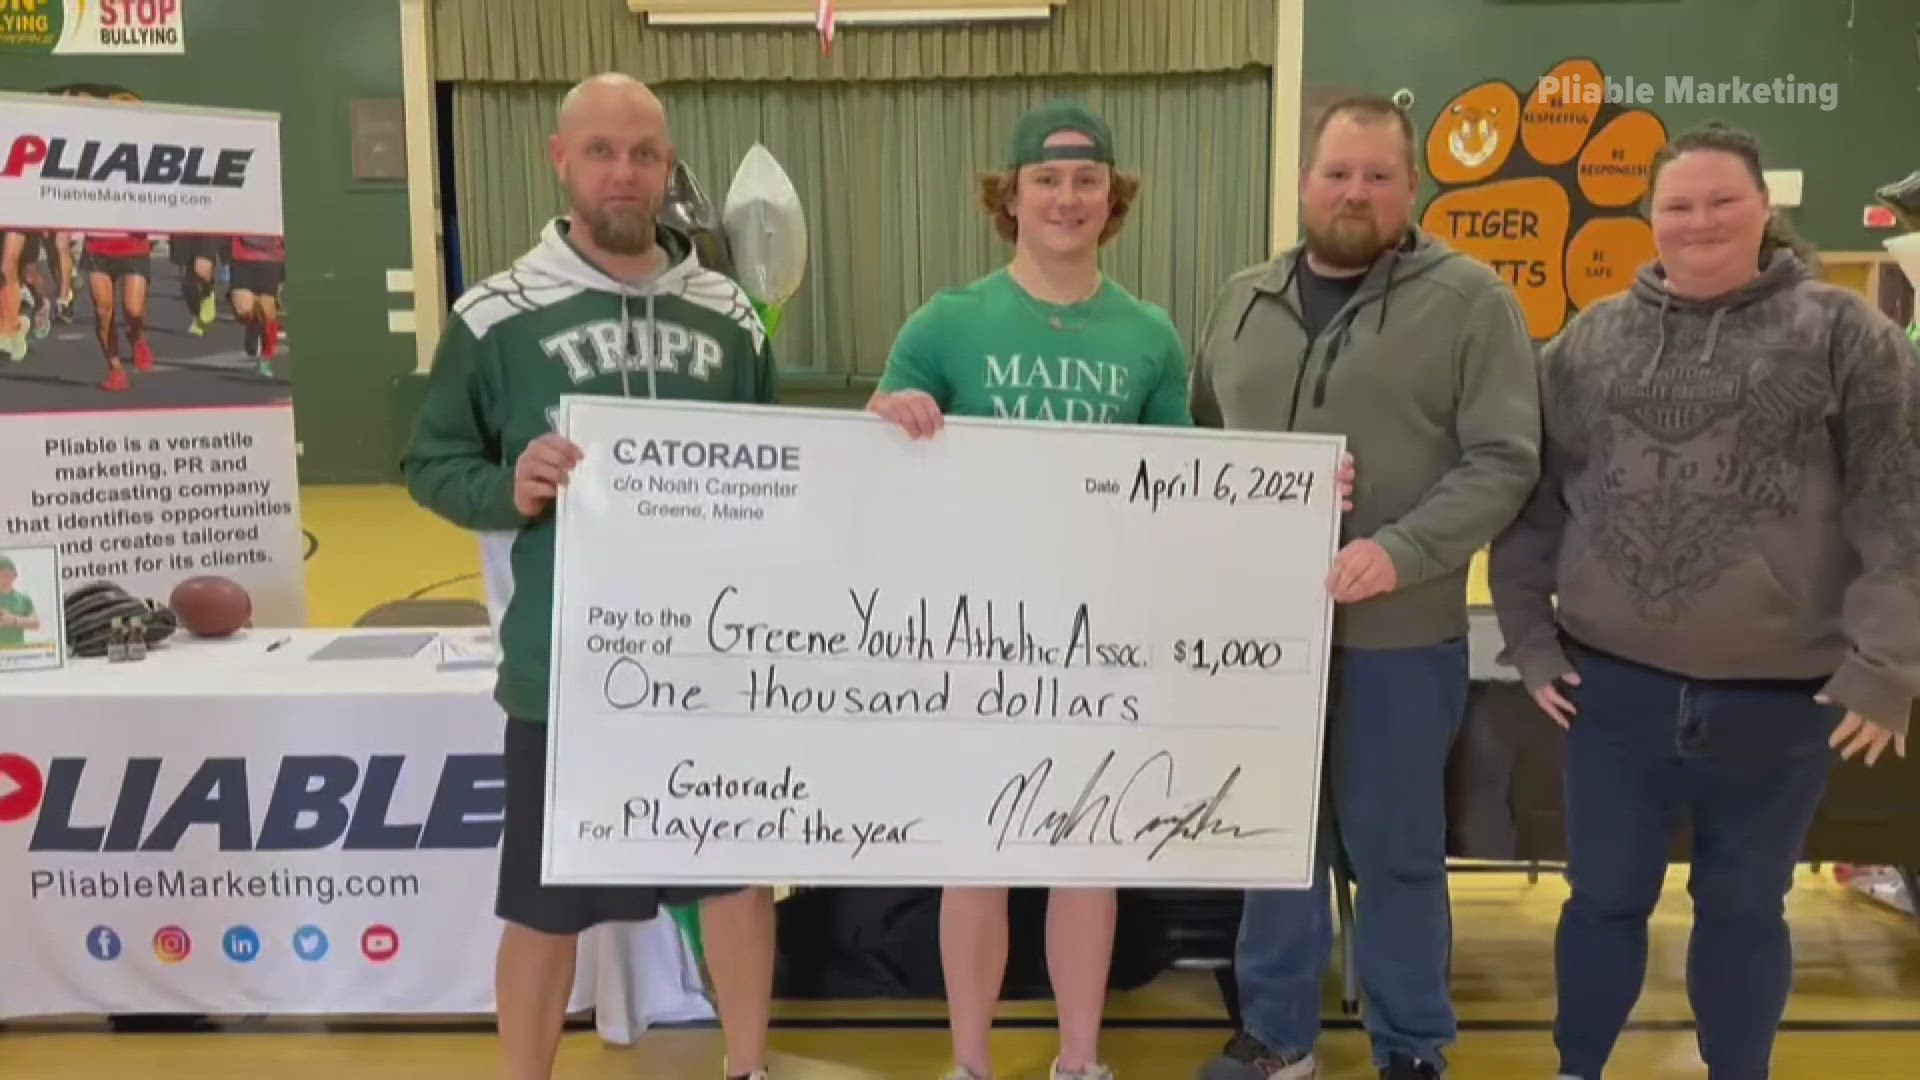 Noah Carpenter hosted a youth sports day event at Tripp Middle School in Turner. Besides encouraging young athletes about sports, he donated $1,000.